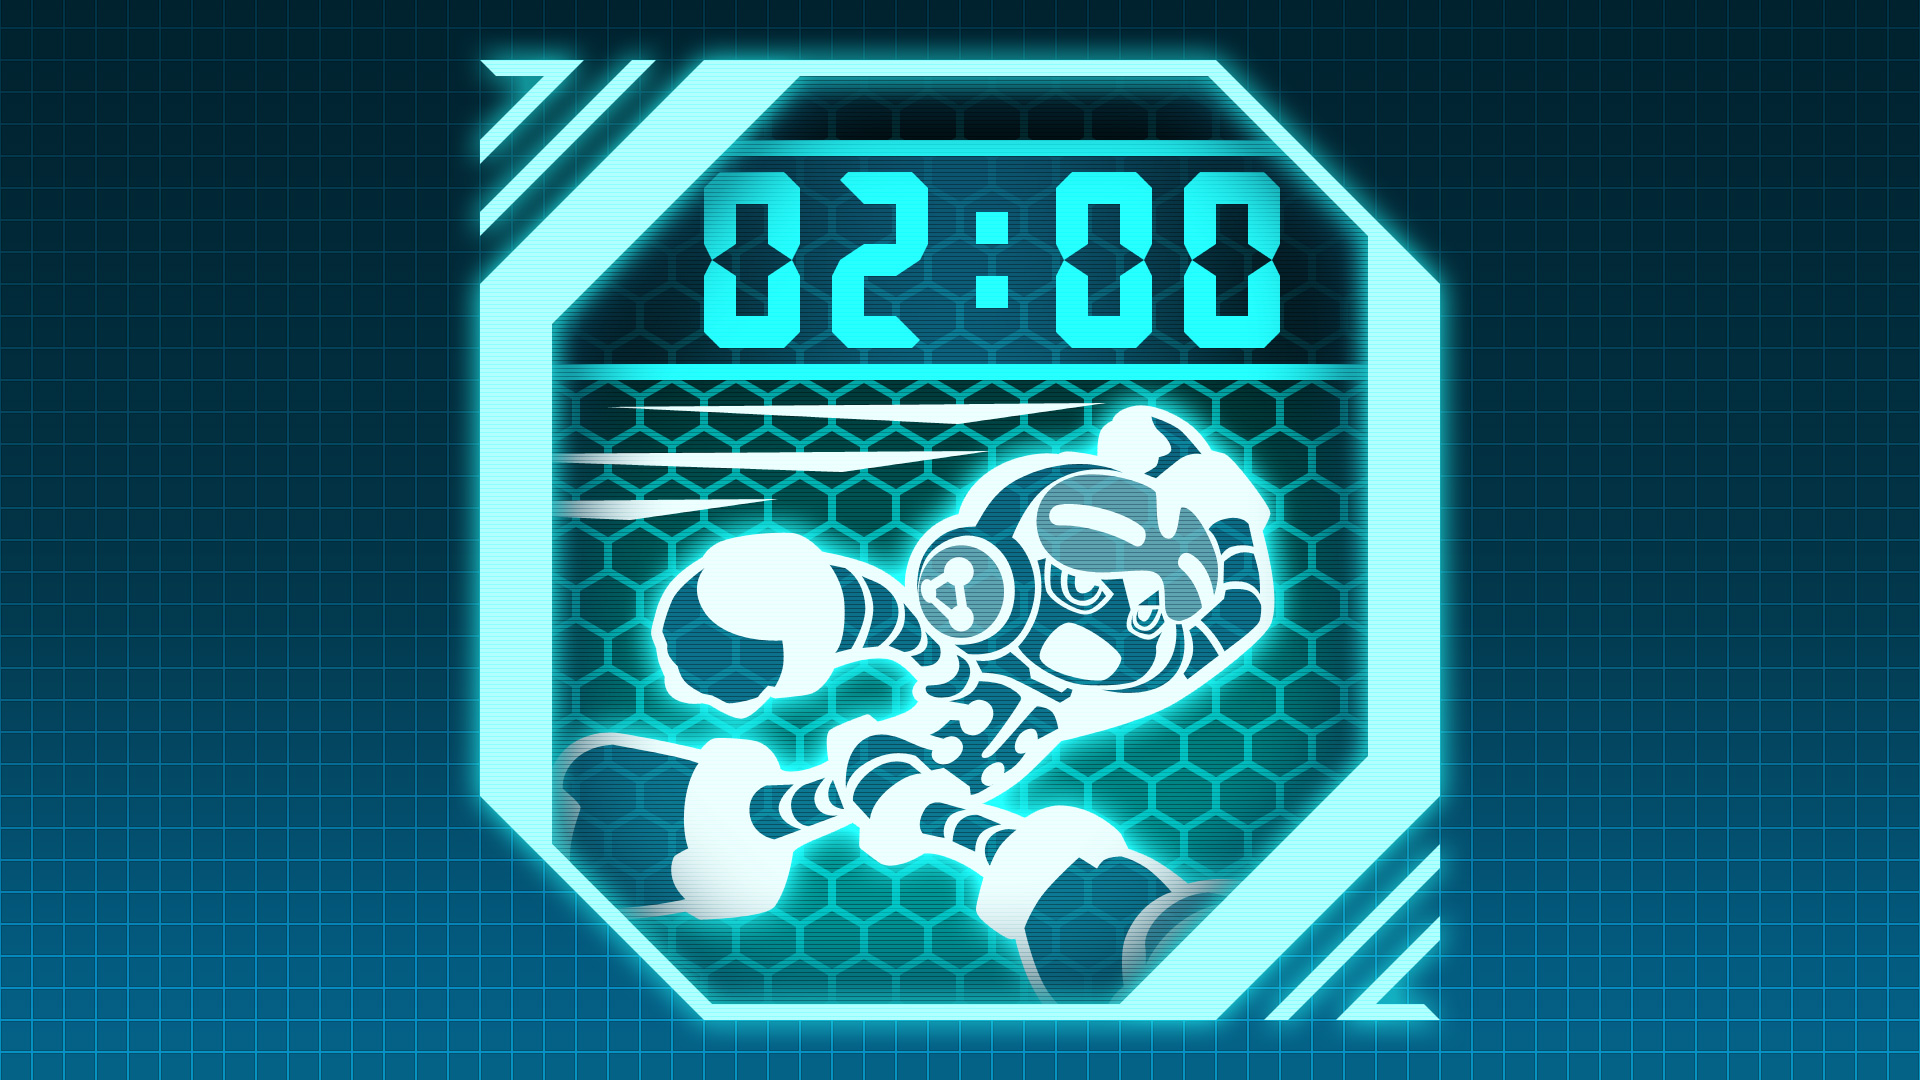 Icon for Cleared Story (Fast)